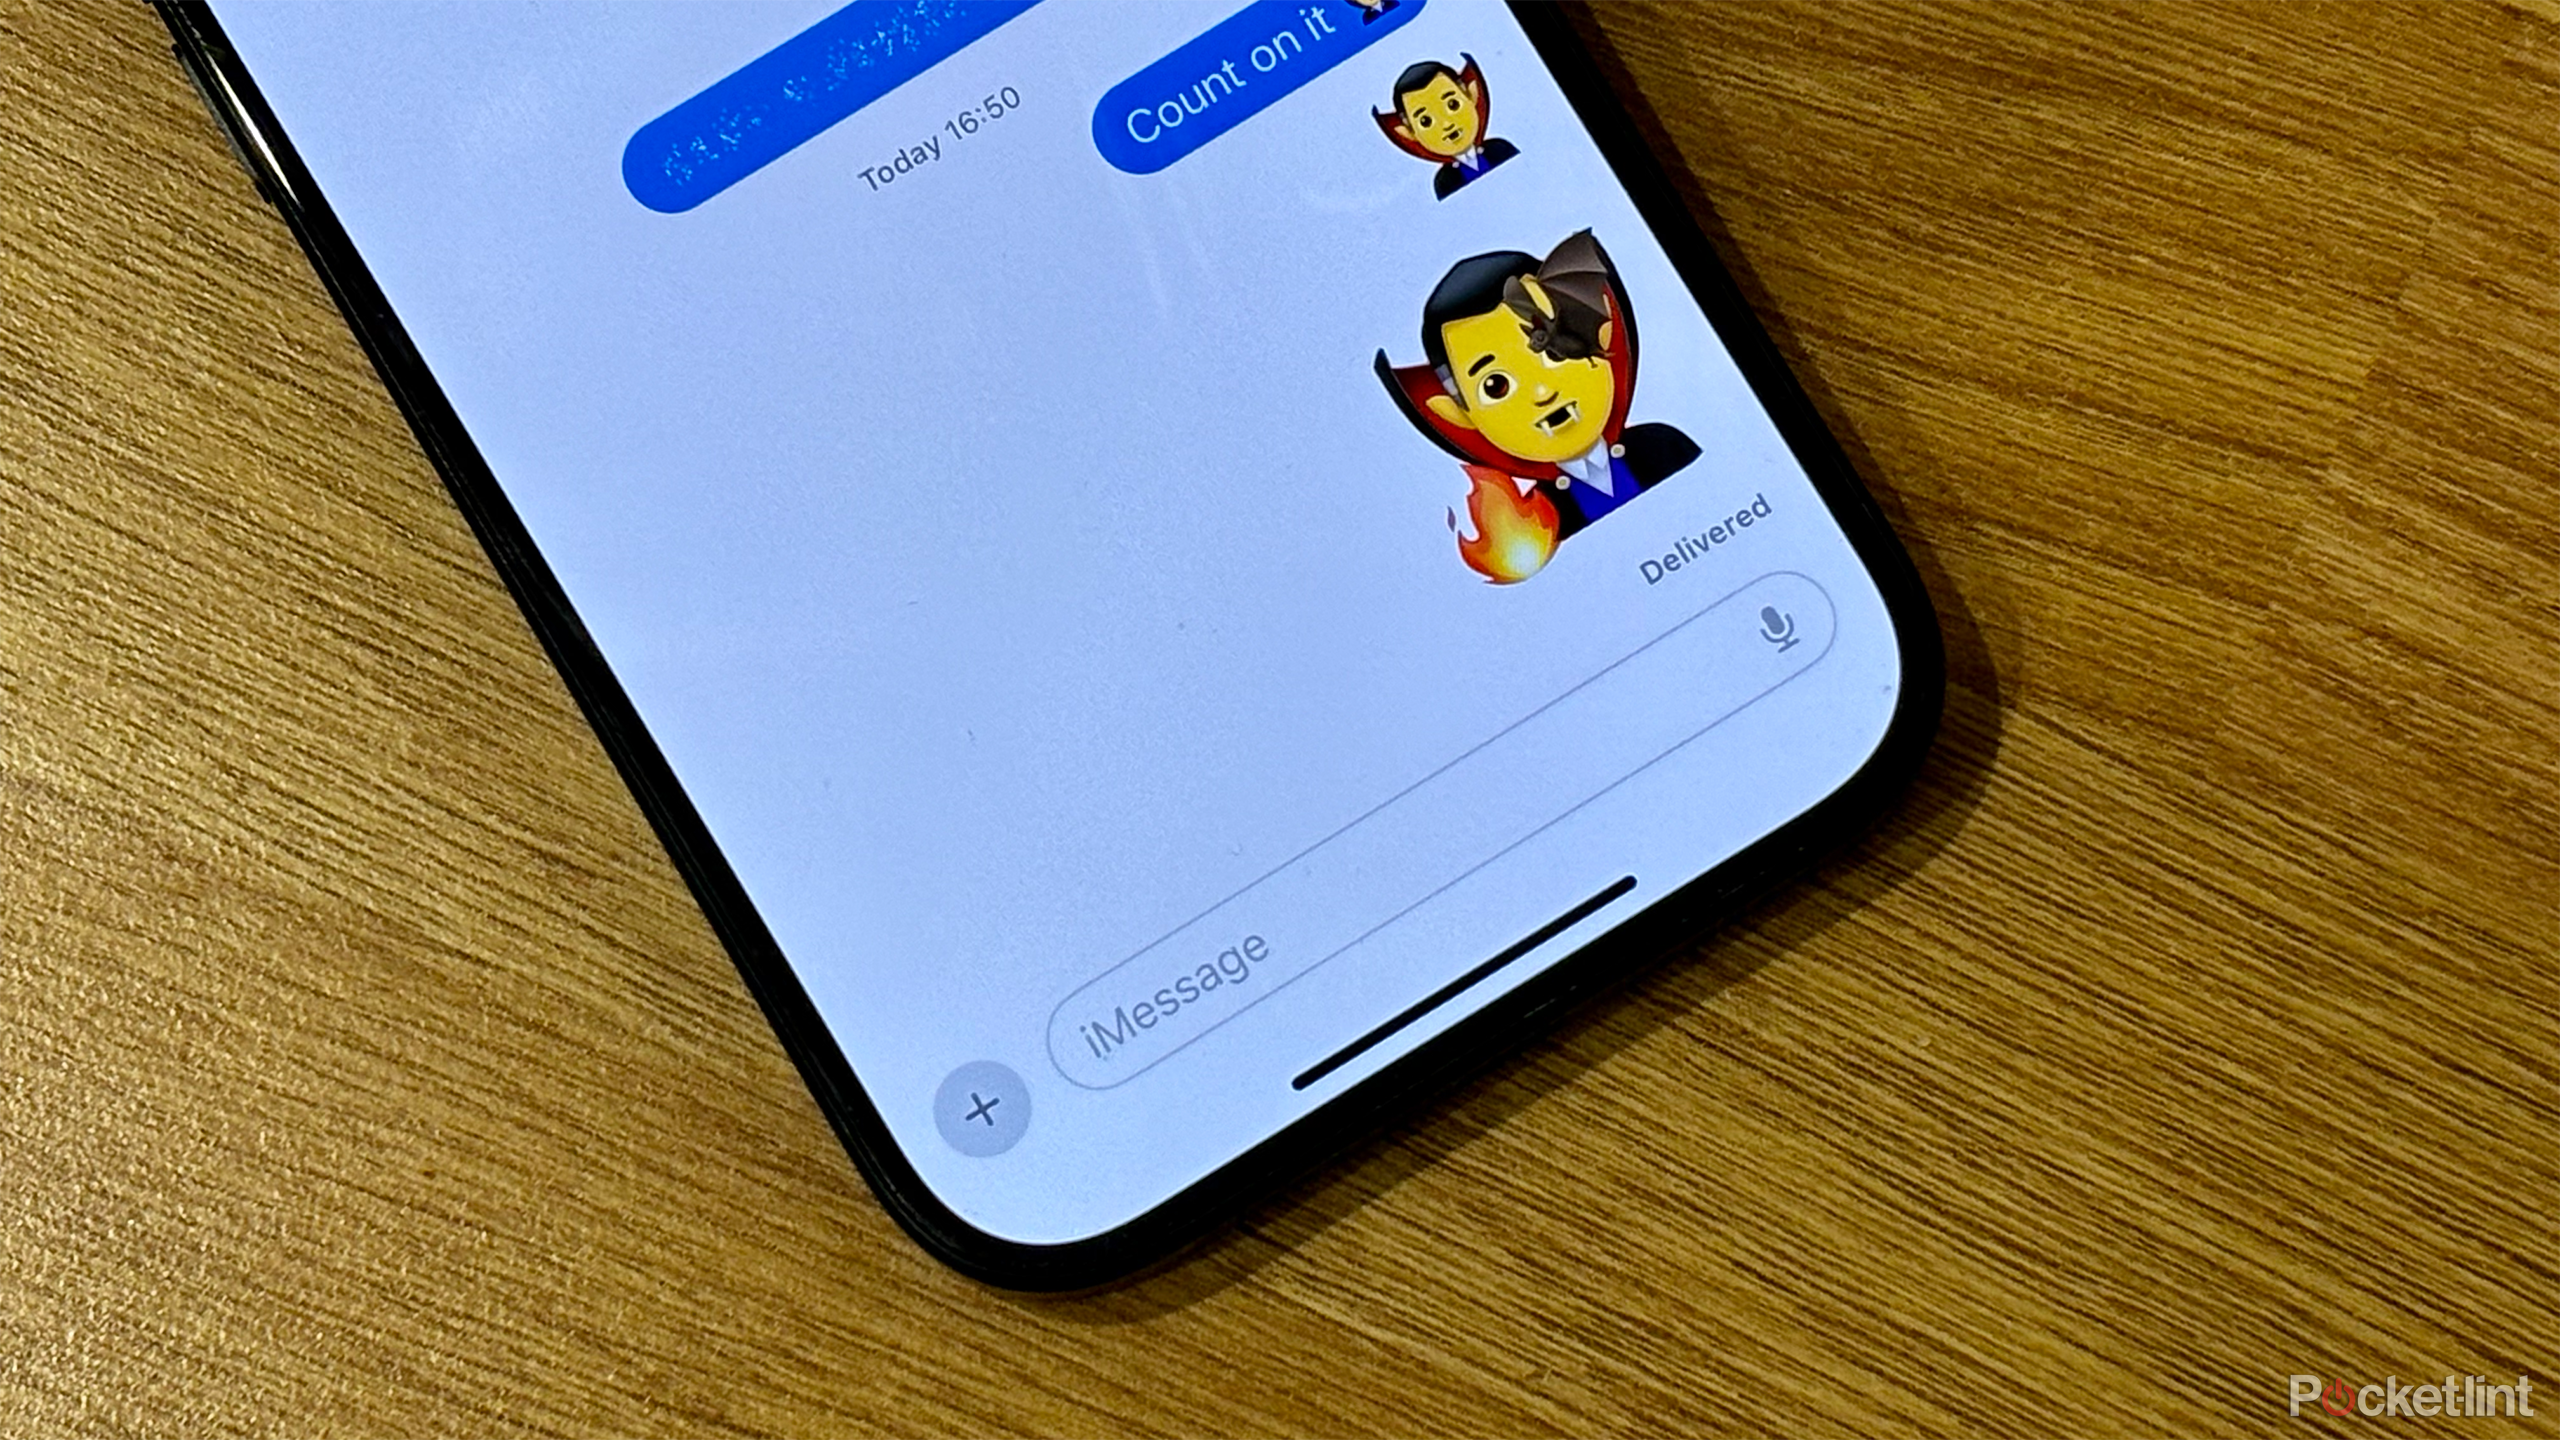 How to stack and combine emoji on your iPhone